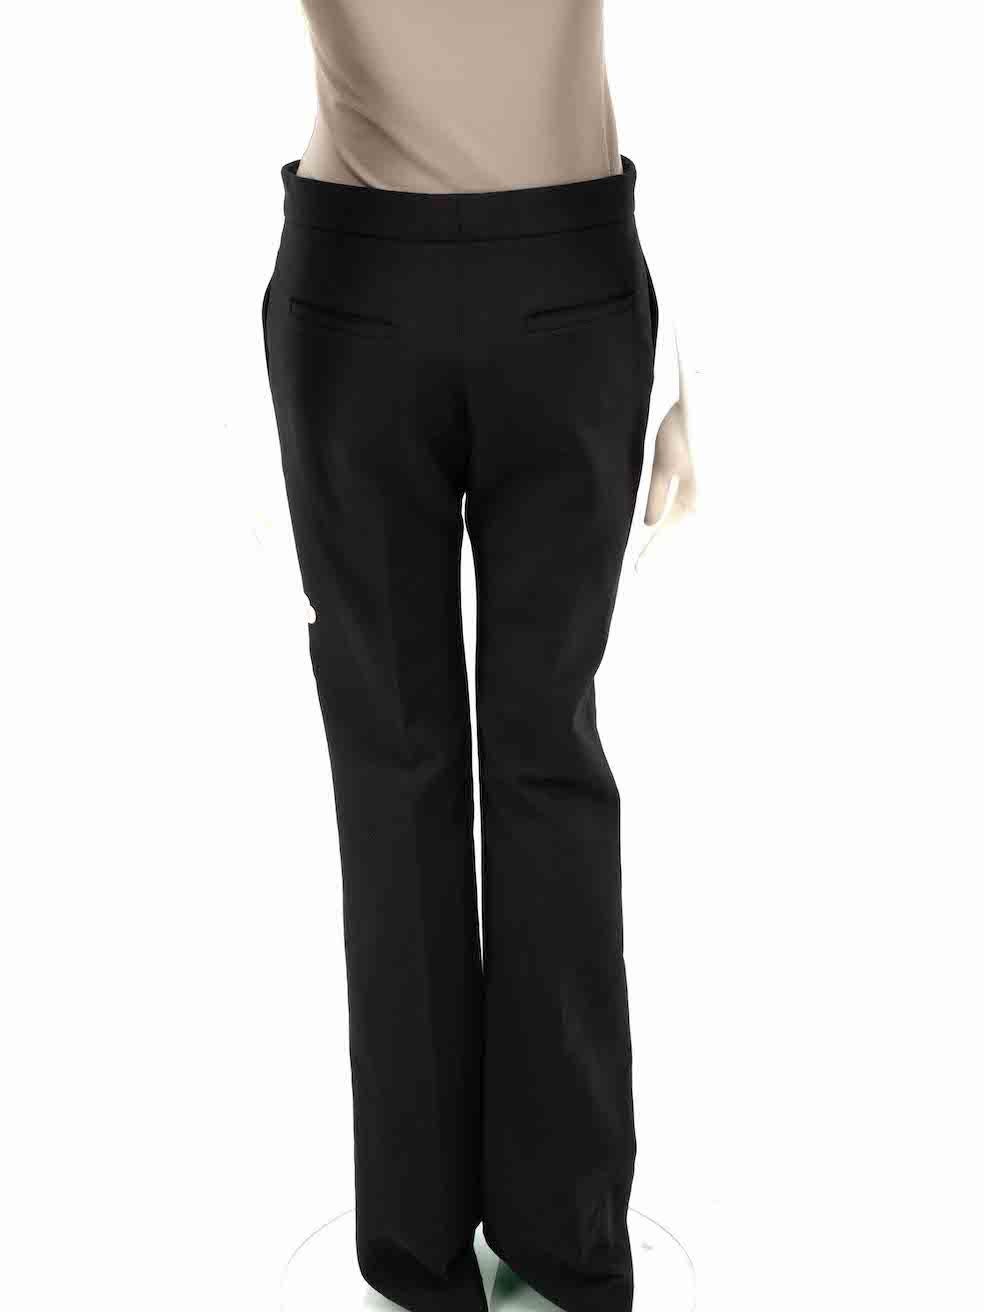 Victoria Beckham Black Flared Leg Trousers Size S In Excellent Condition For Sale In London, GB